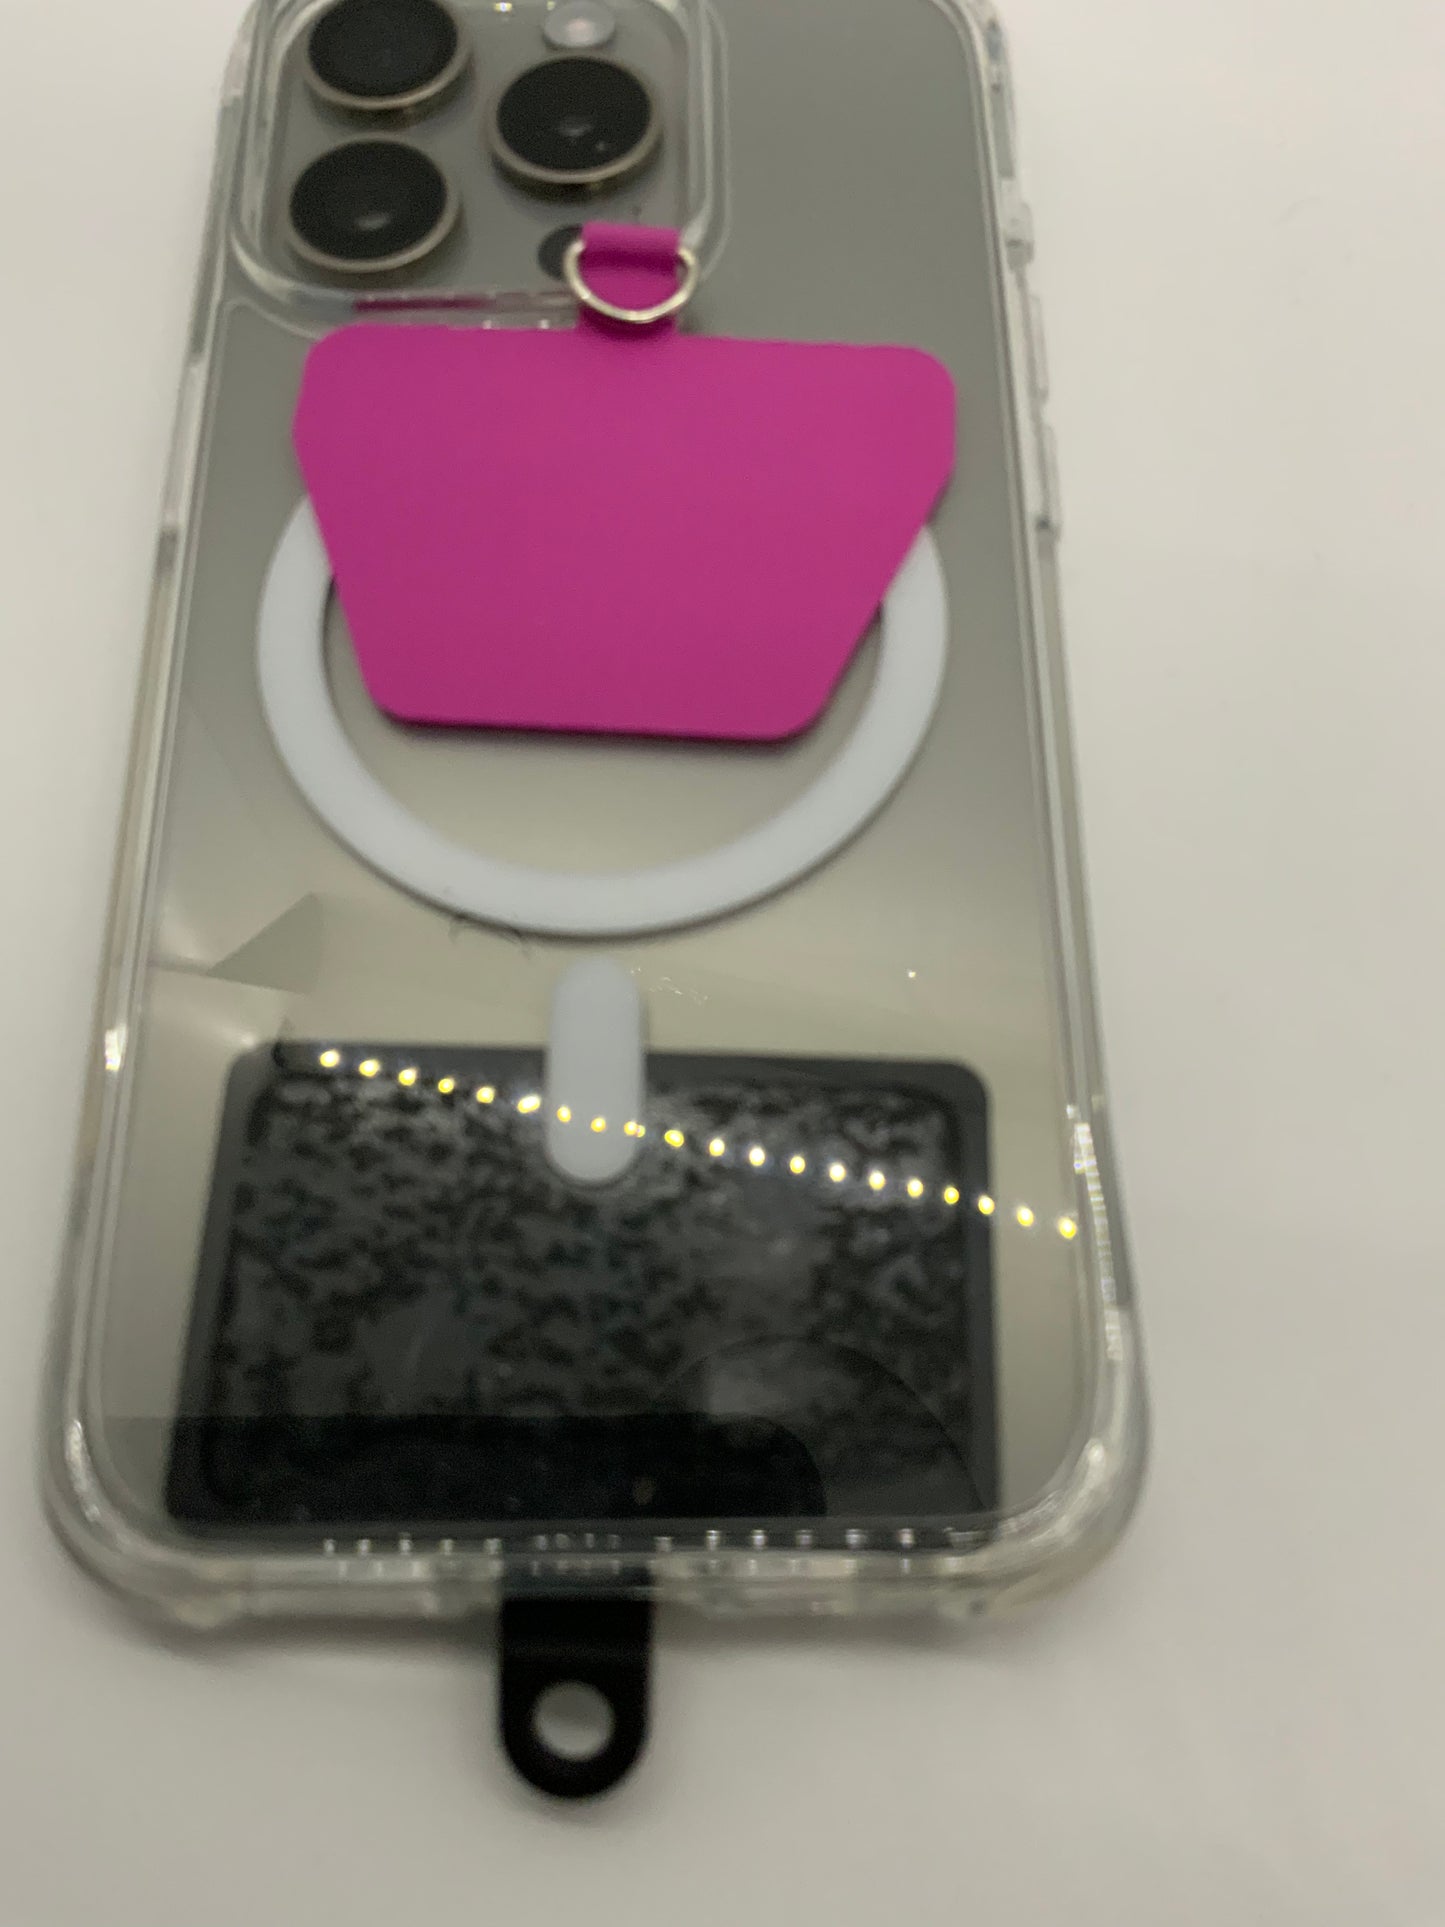 The picture shows a close-up of the back of a smartphone with a clear case. The phone has three camera lenses in a triangular arrangement at the top left corner. There is a pink adhesive wallet attached to the back of the case, which is shaped like a small pocket with a ring at the top. Below the wallet, there is a white circular object that seems to be attached to the case. The bottom part of the phone is visible, showing a black strip with a small tab, possibly for opening the case. The backgrou